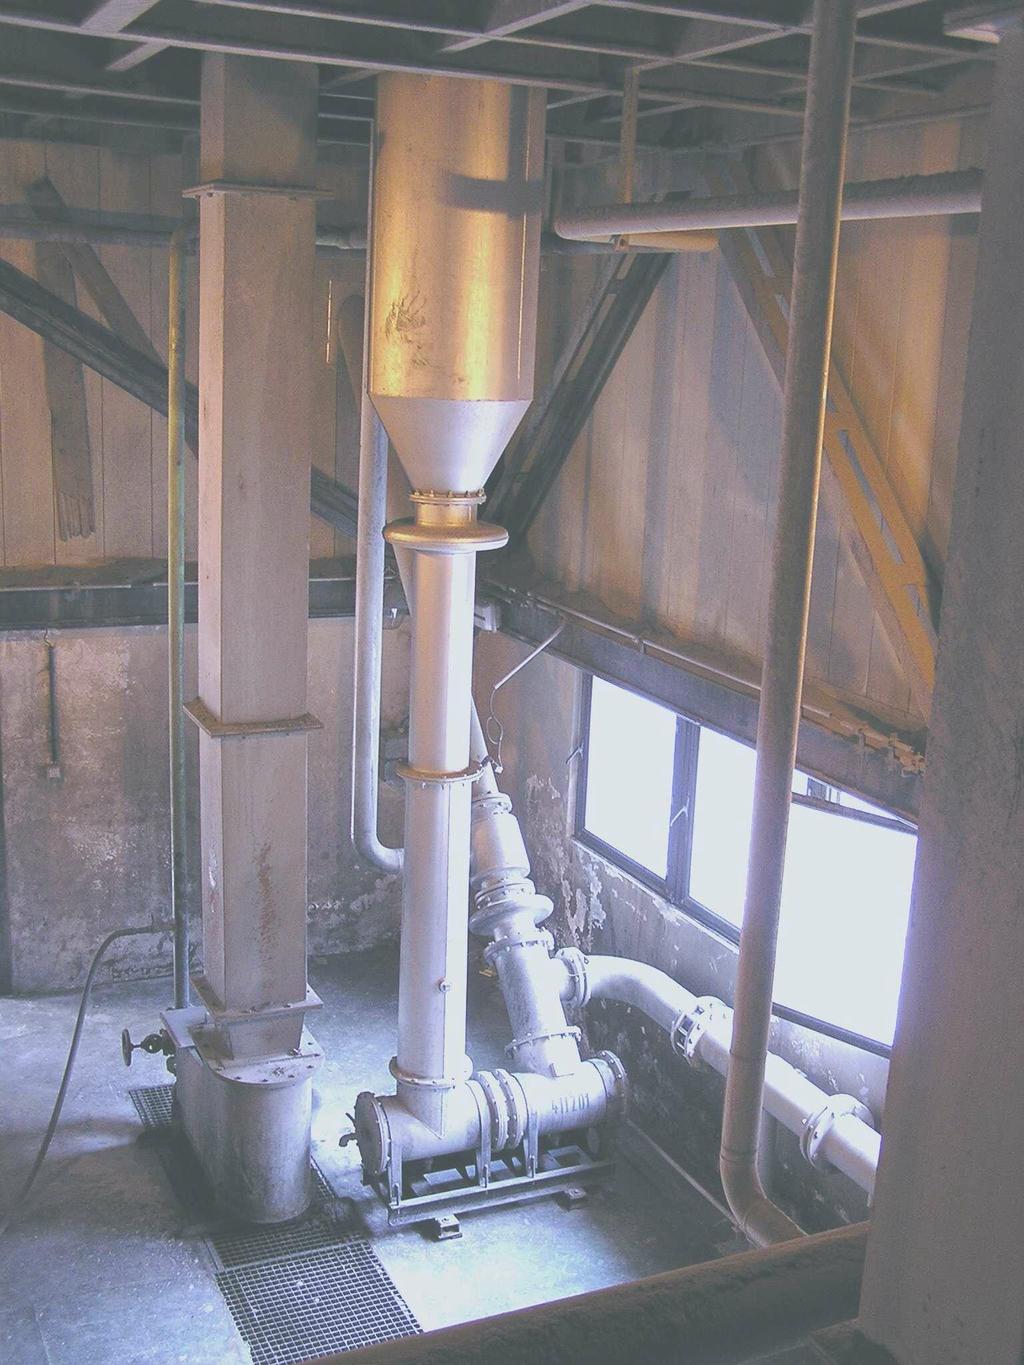 4 The last realised equipment of its system described in this article has been built at United Energy Komořany Heating Plant. It has been in operation since September 2004.